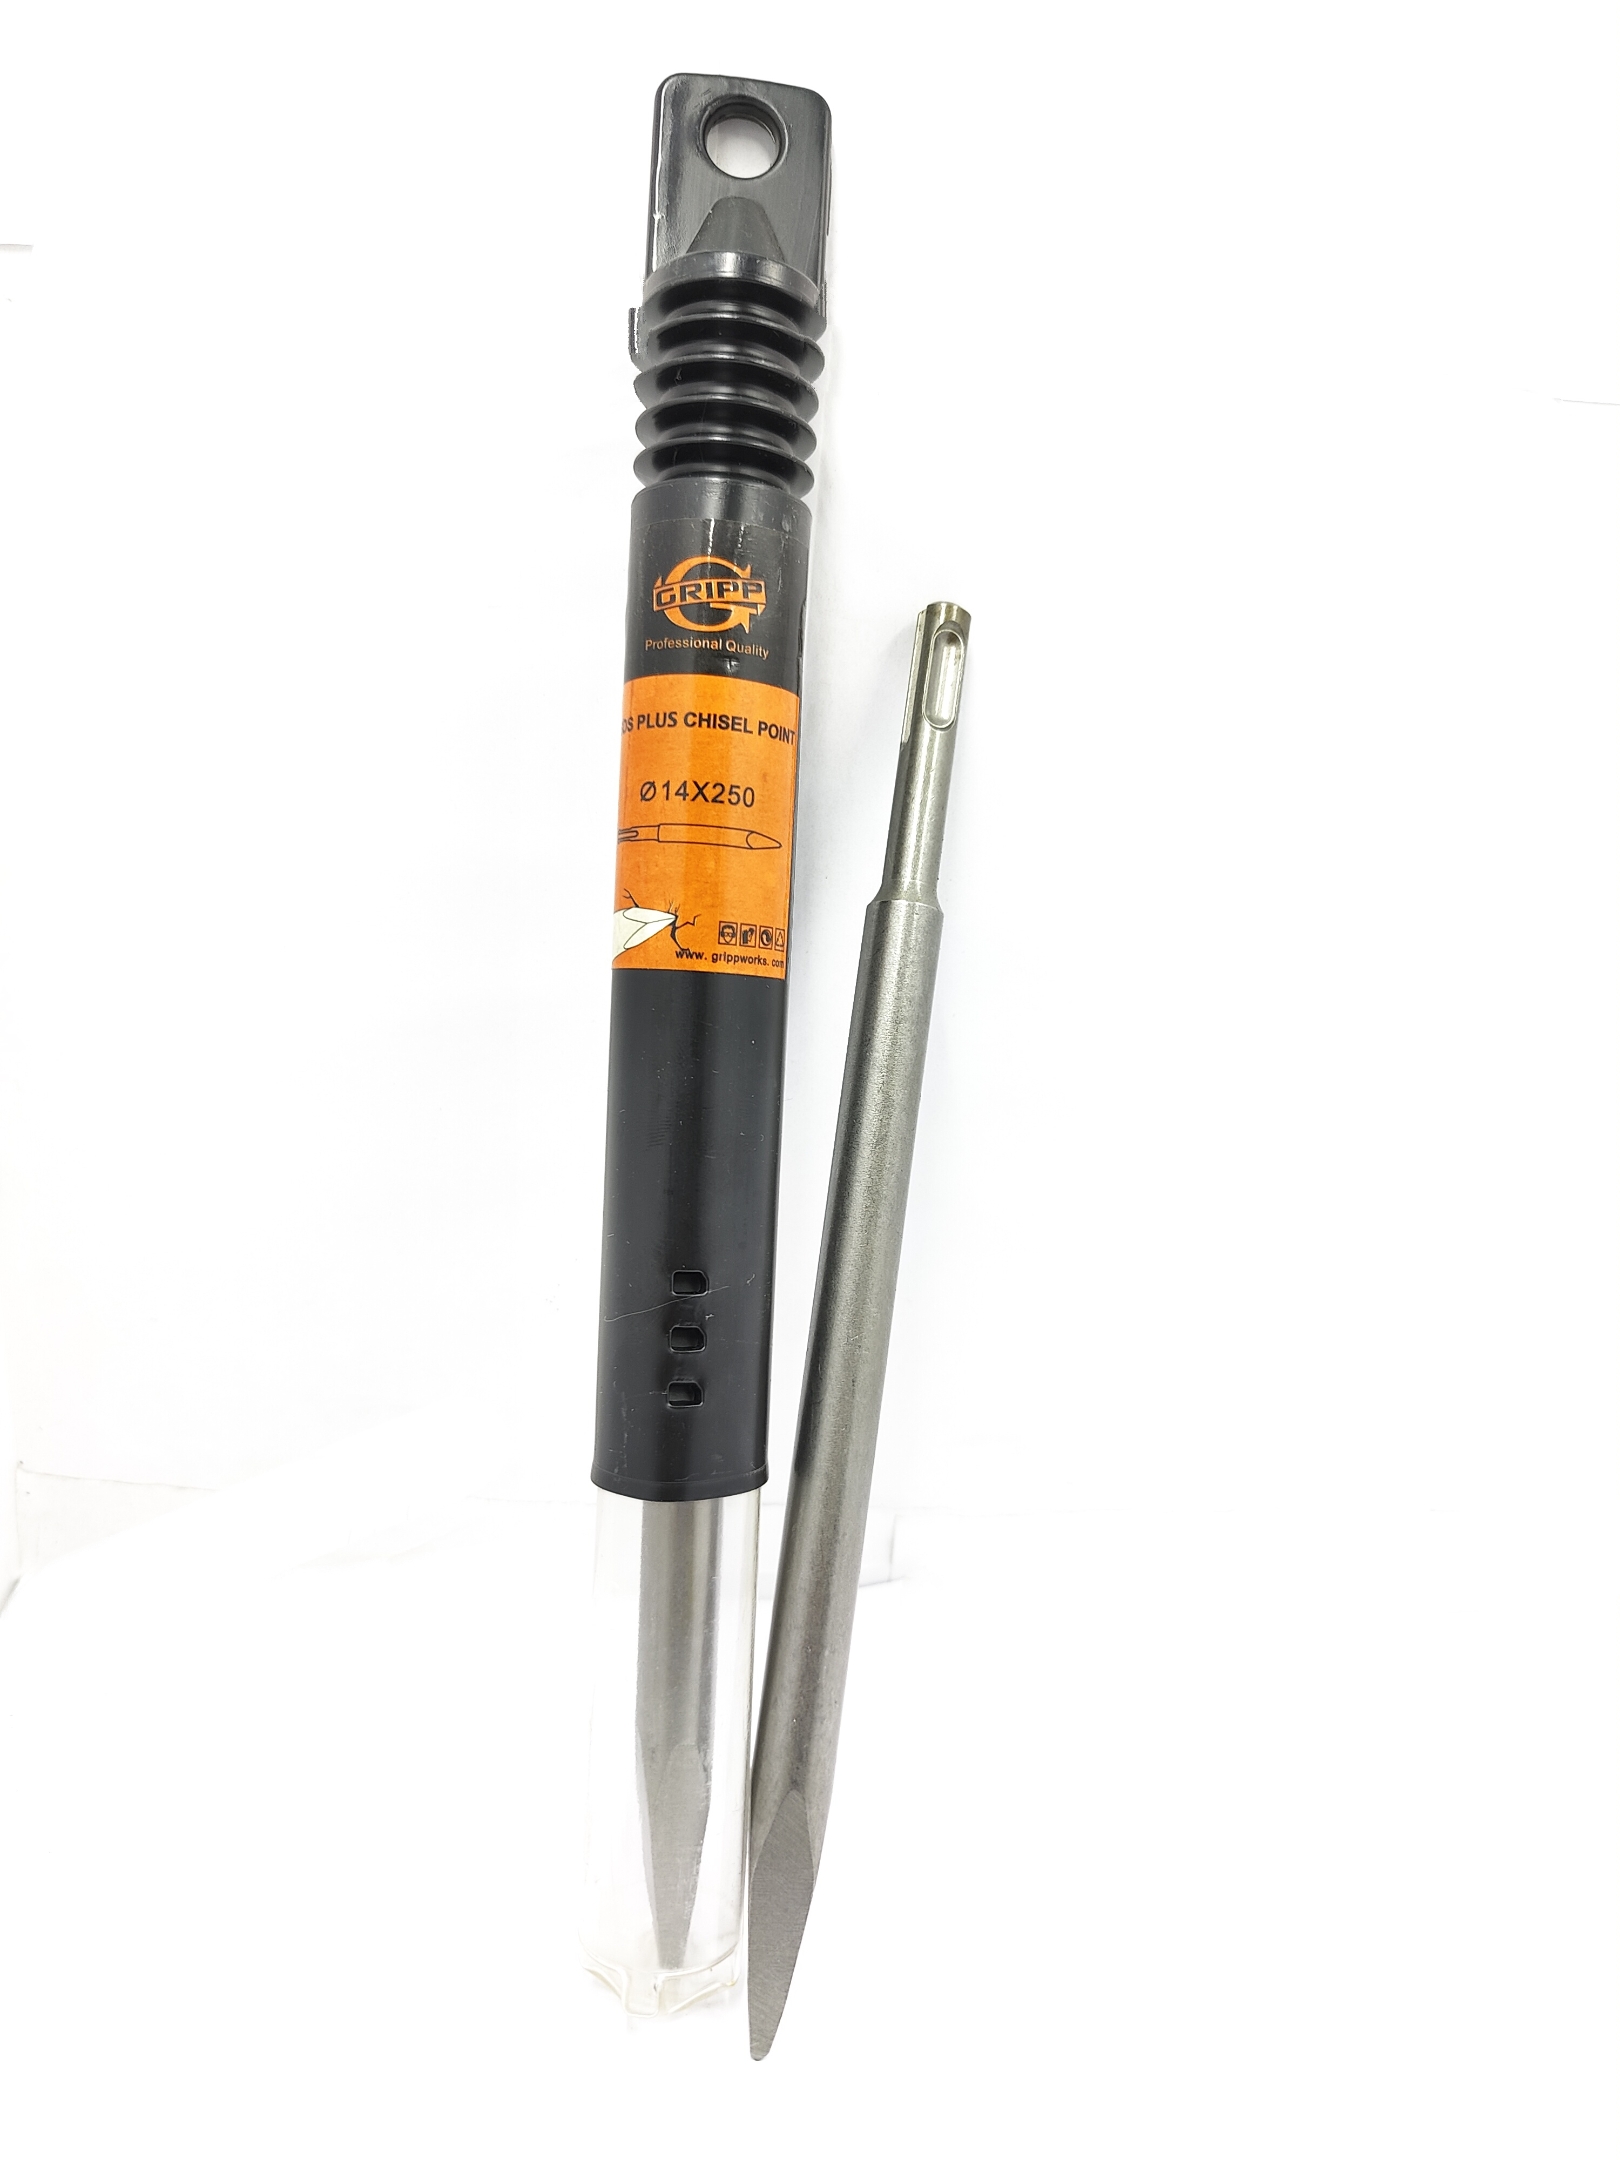 Chisel sds type pointed